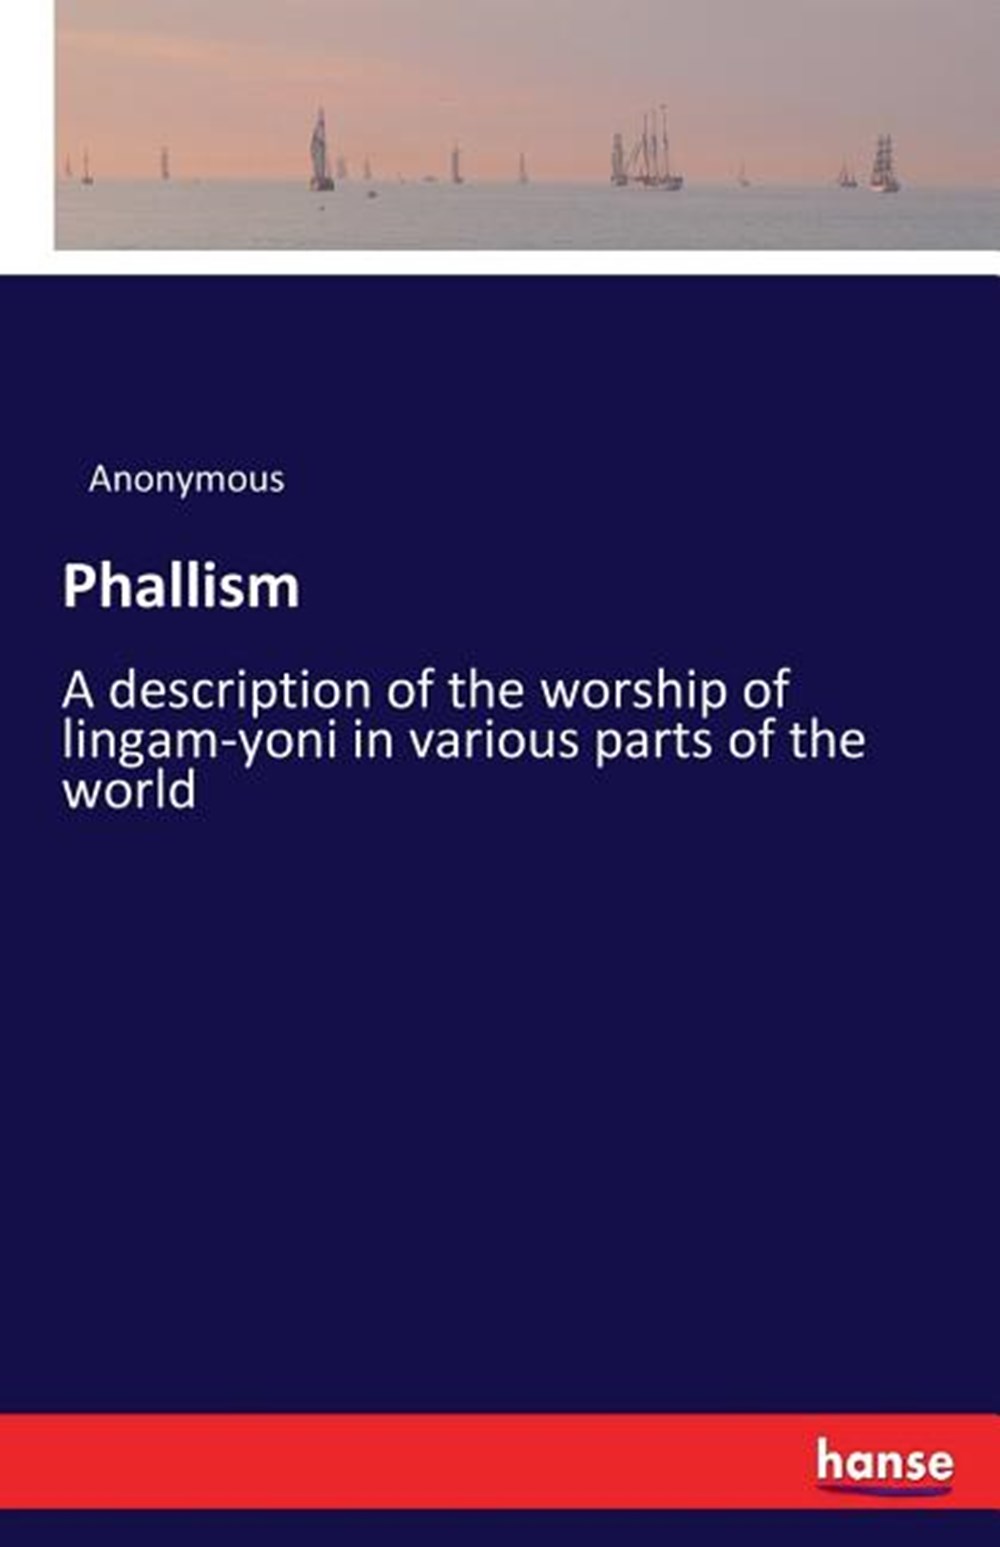 Phallism: A description of the worship of lingam-yoni in various parts of the world